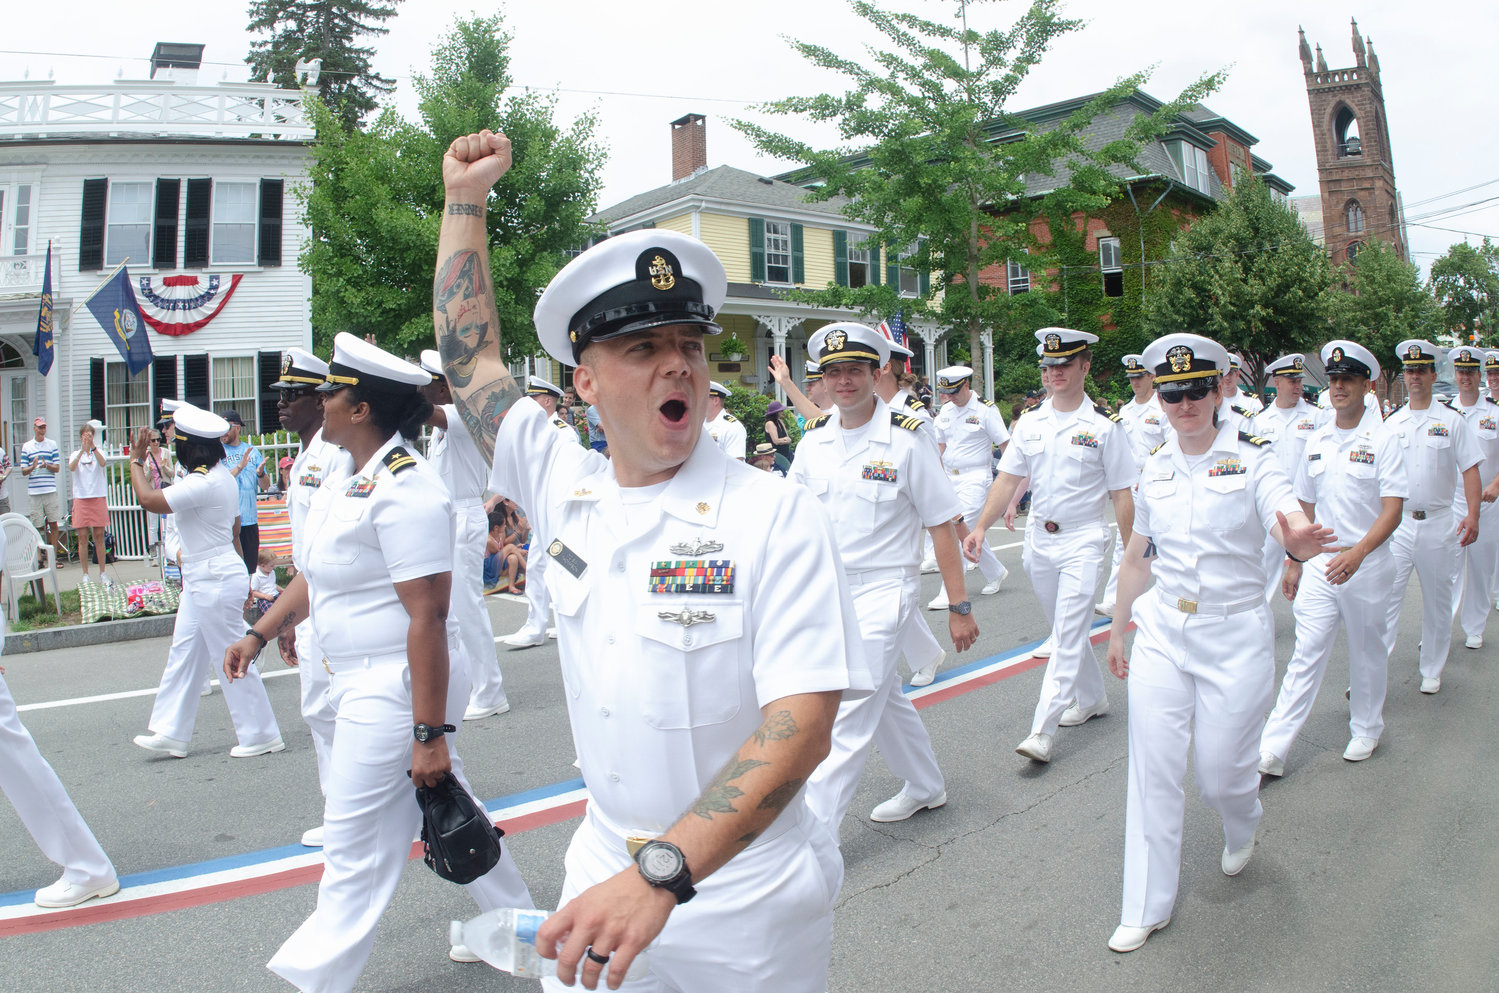 A unit of Naval officers acknowledge the crowd along Hope Street during the 2021 Bristol Fourth of July Parade